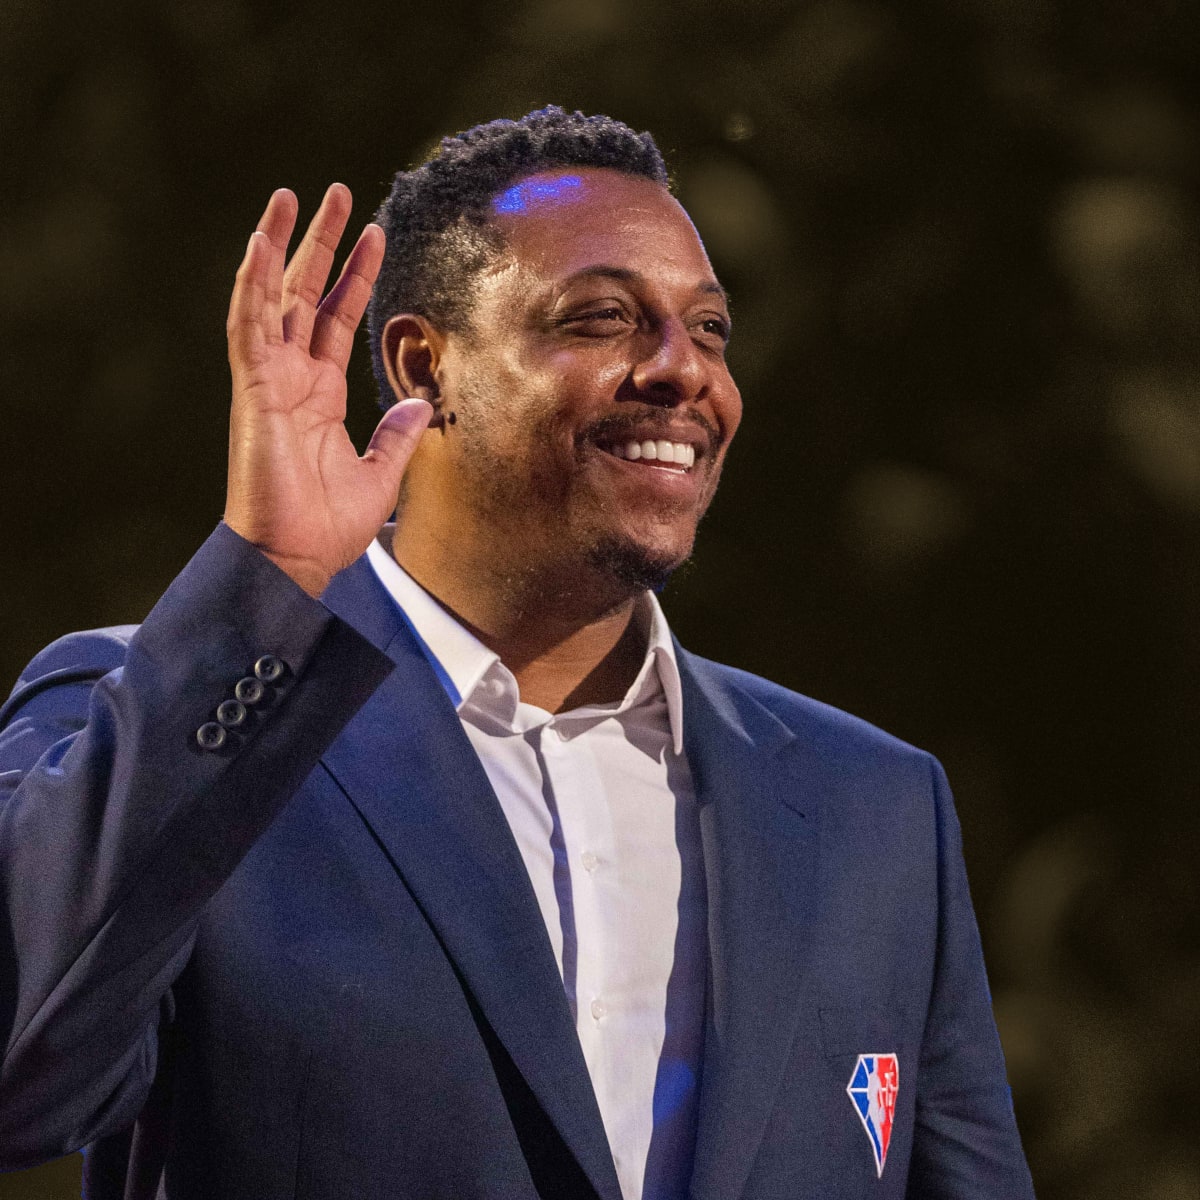 Paul Pierce elected to Naismith Memorial Basketball Hall of Fame